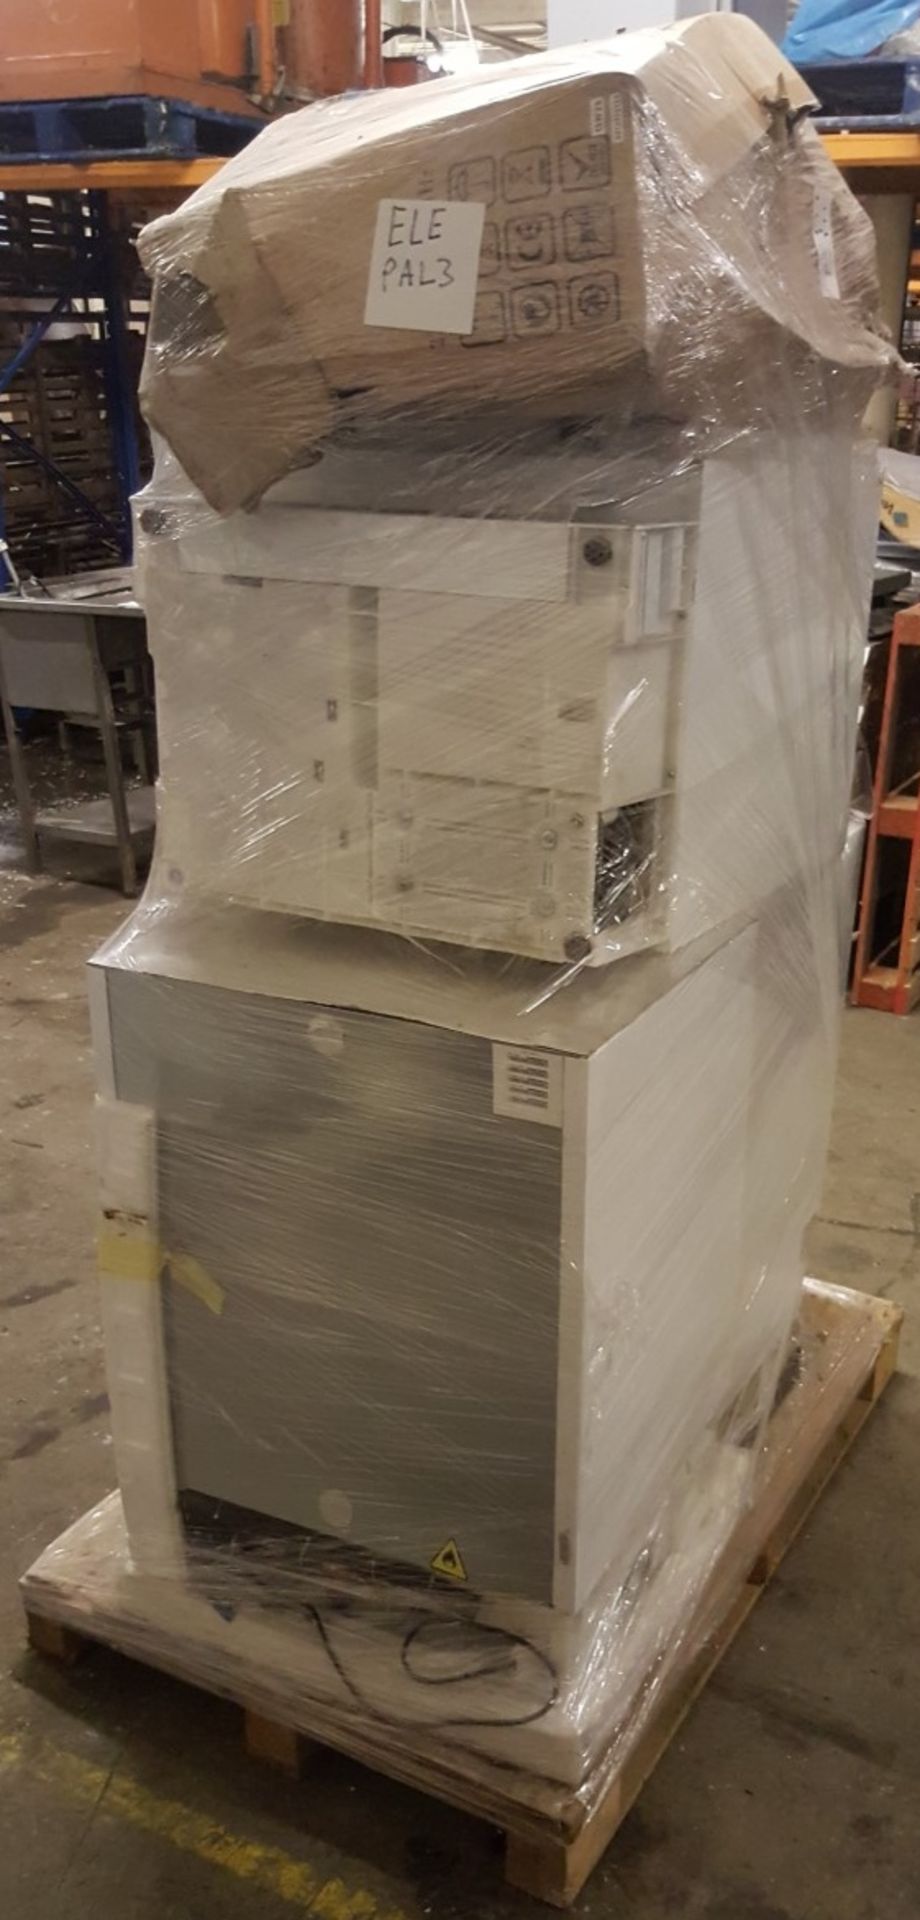 1 x Assorted Pallet of Domestic Appliances - Includes Fridges, Dishwasher & More REF: ELEPAL3 - Image 9 of 9